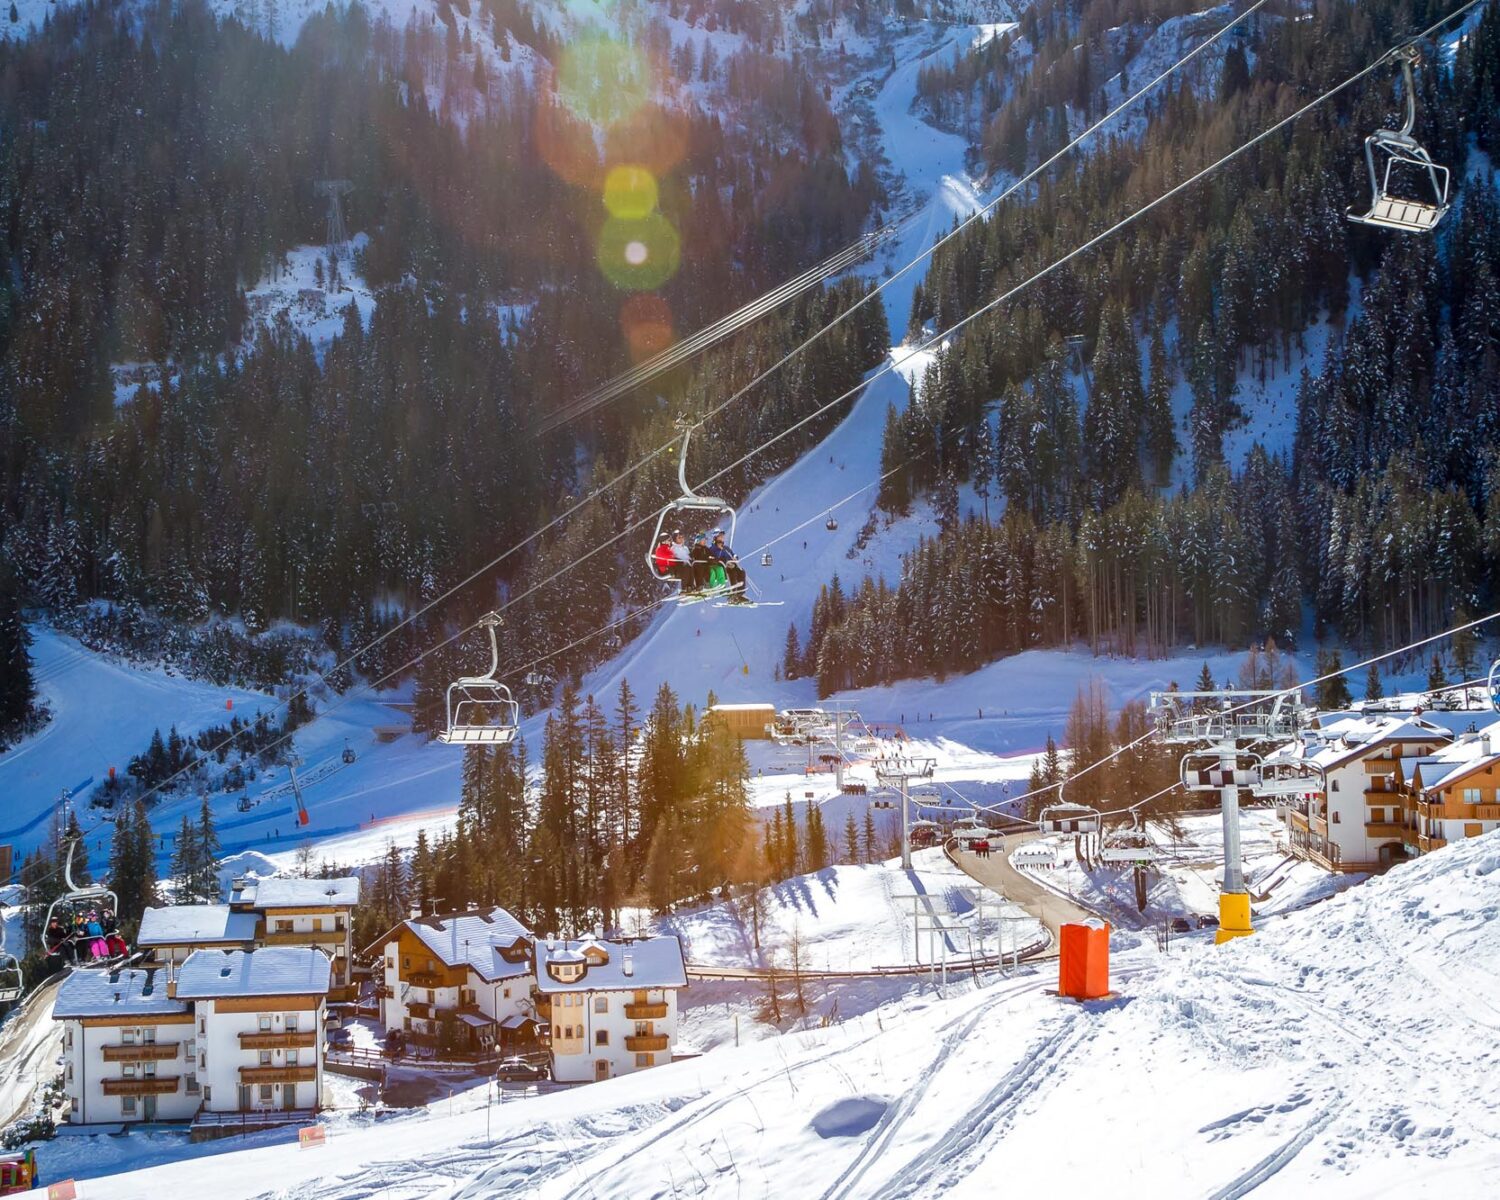 View of Arabba village and chair lift with skiers on a sunny winter day. Sellaronda, Dolomiti Superski.